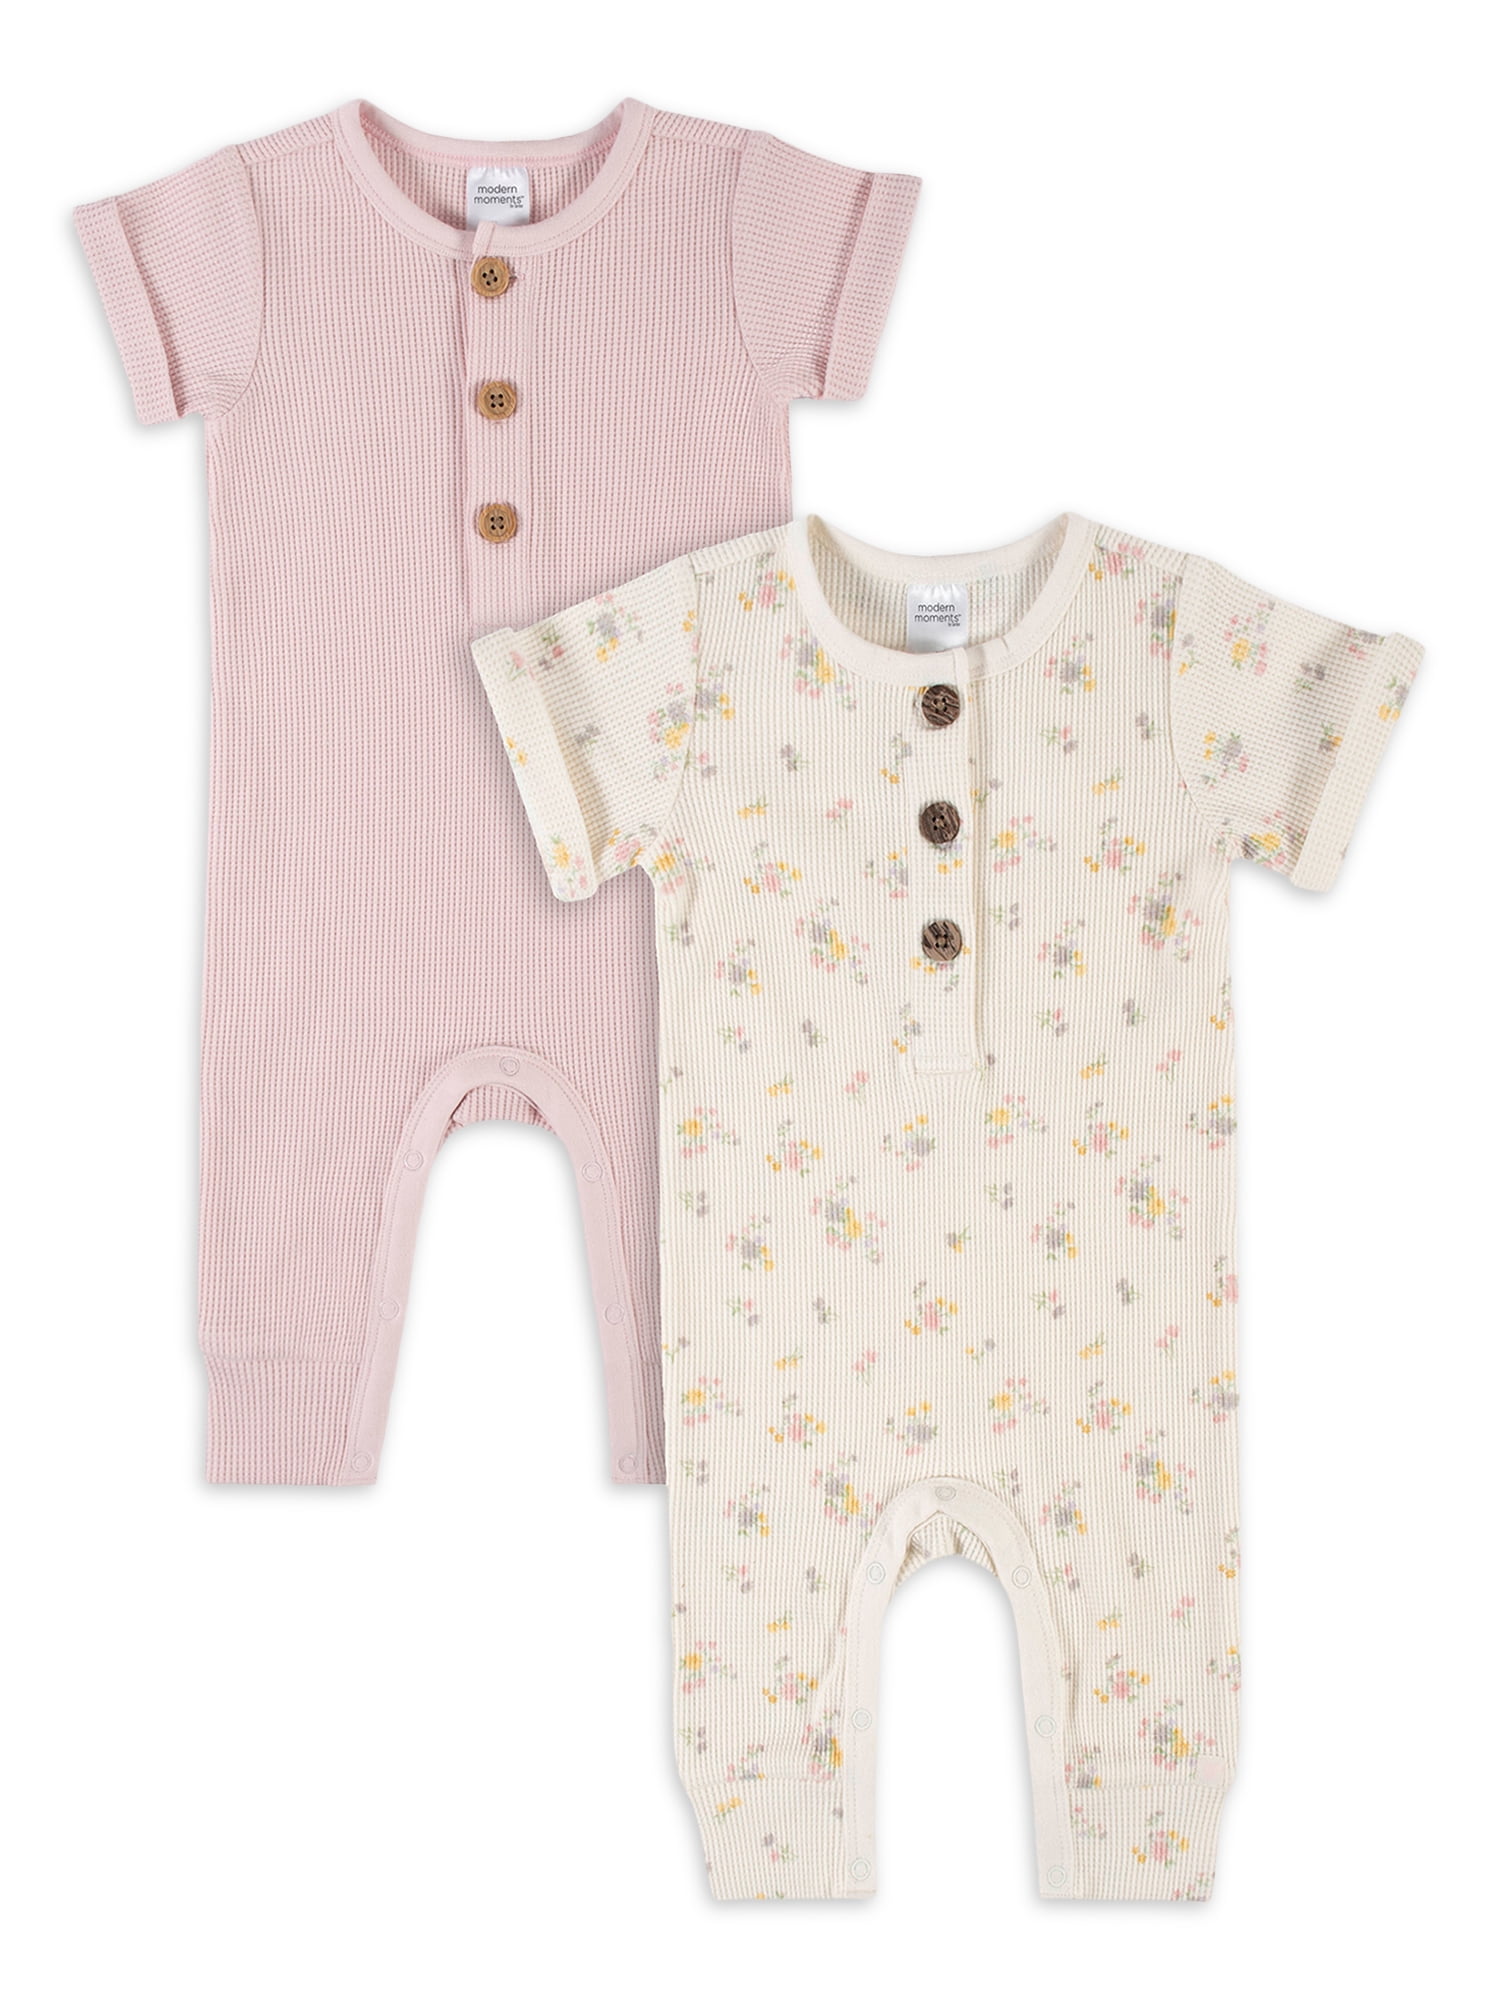 Gerber Modern Moments Baby Girl's Coverall NEW Size 6-9 Months Adorable 